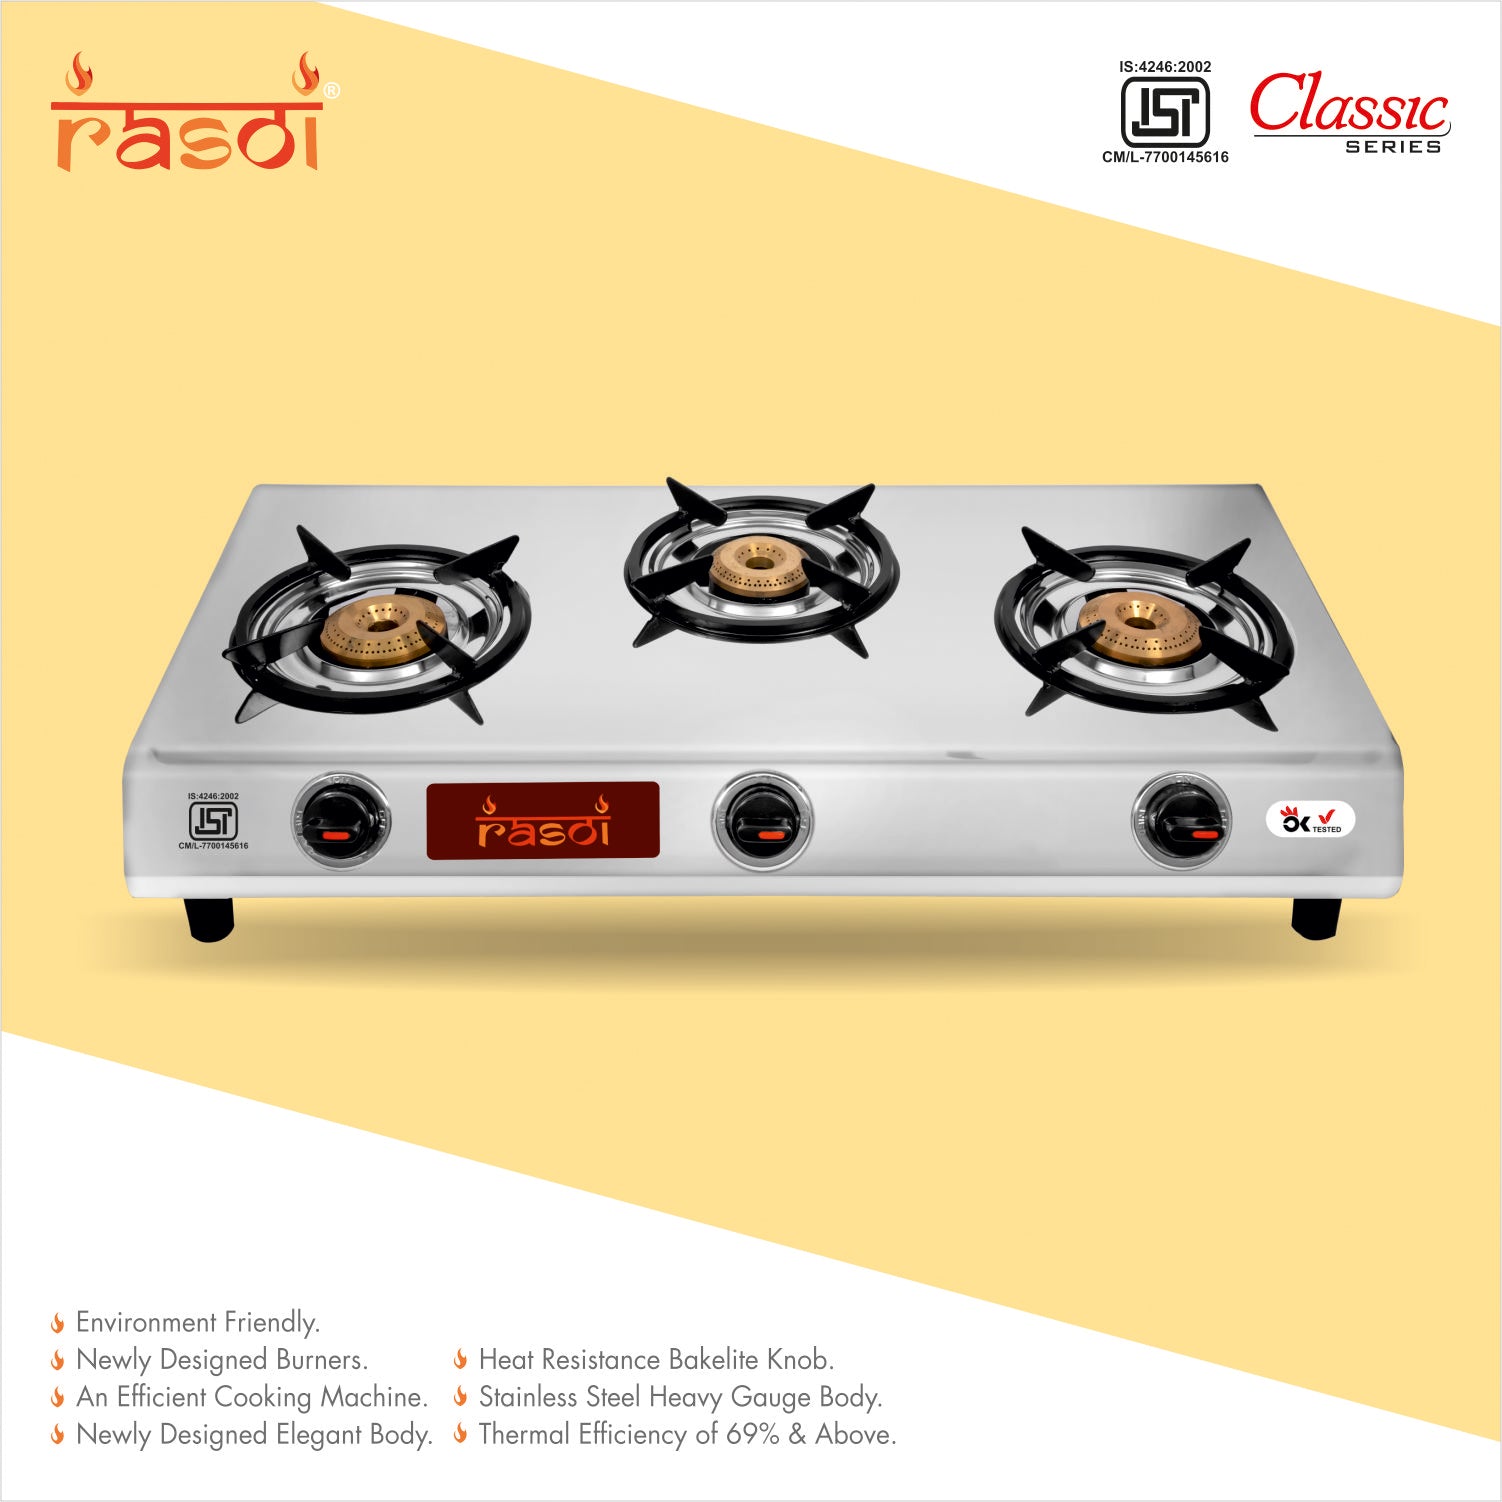 Rasoi Classic Stainless Steel 3 Burner Gas Stove, Silver (ISI Certified)